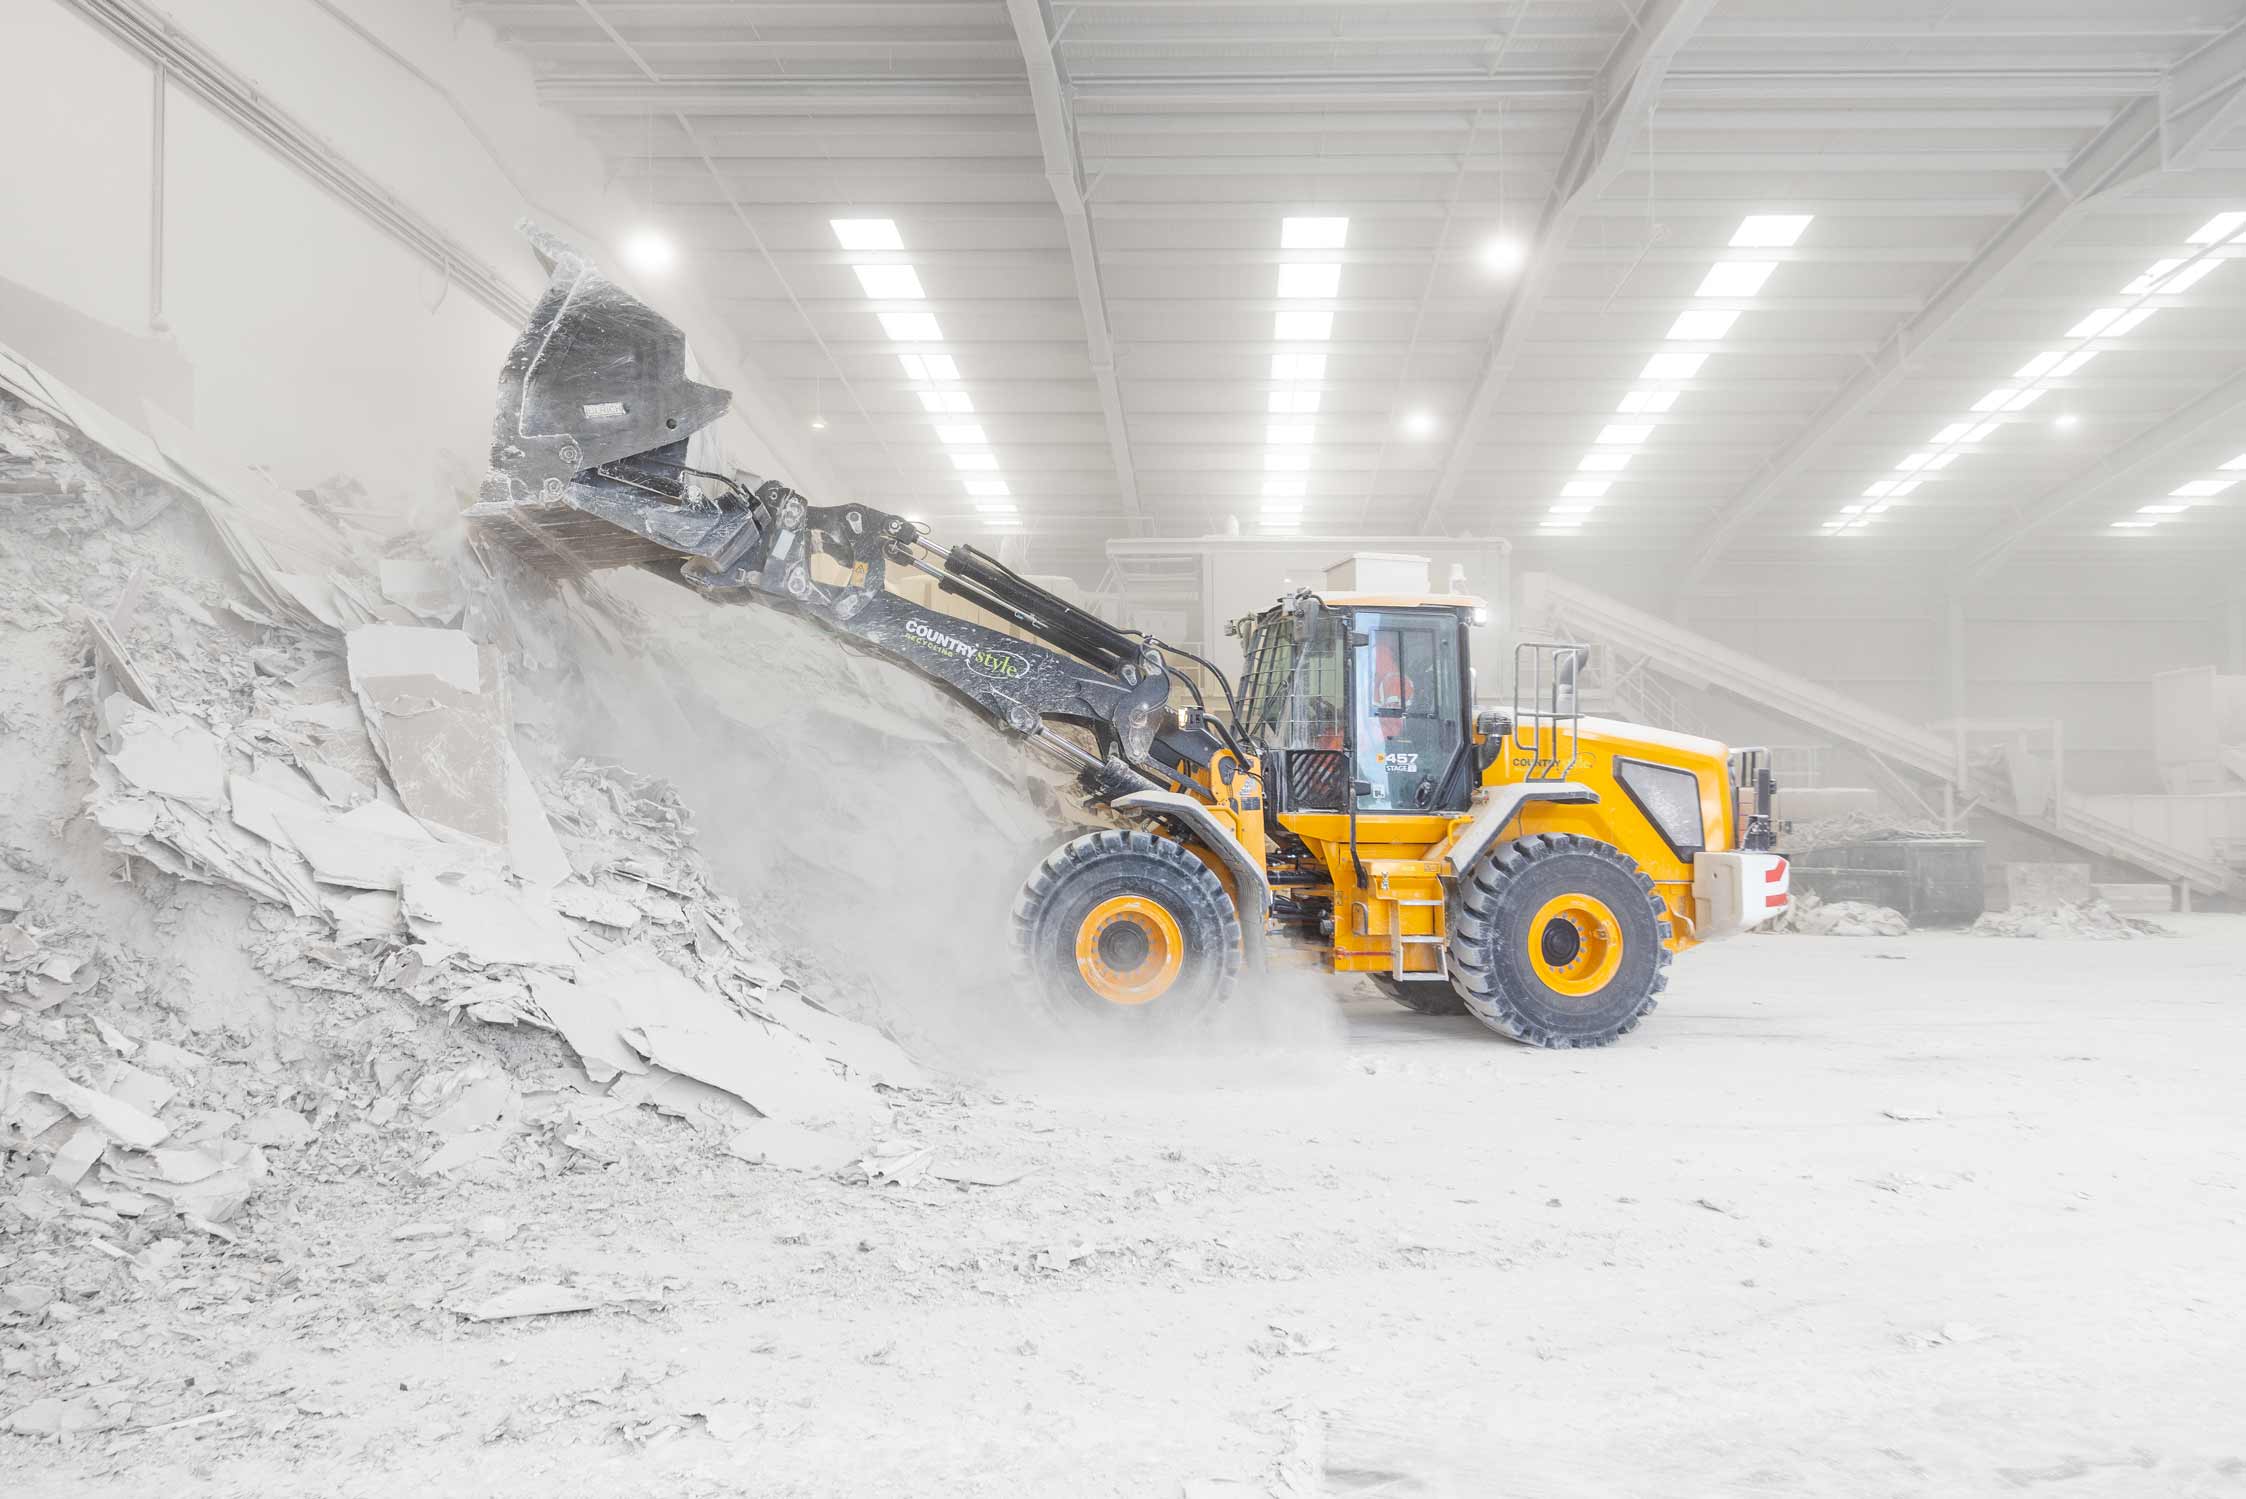 A yellow front loader plant equipment pushes and scoops plasterboard into a mound